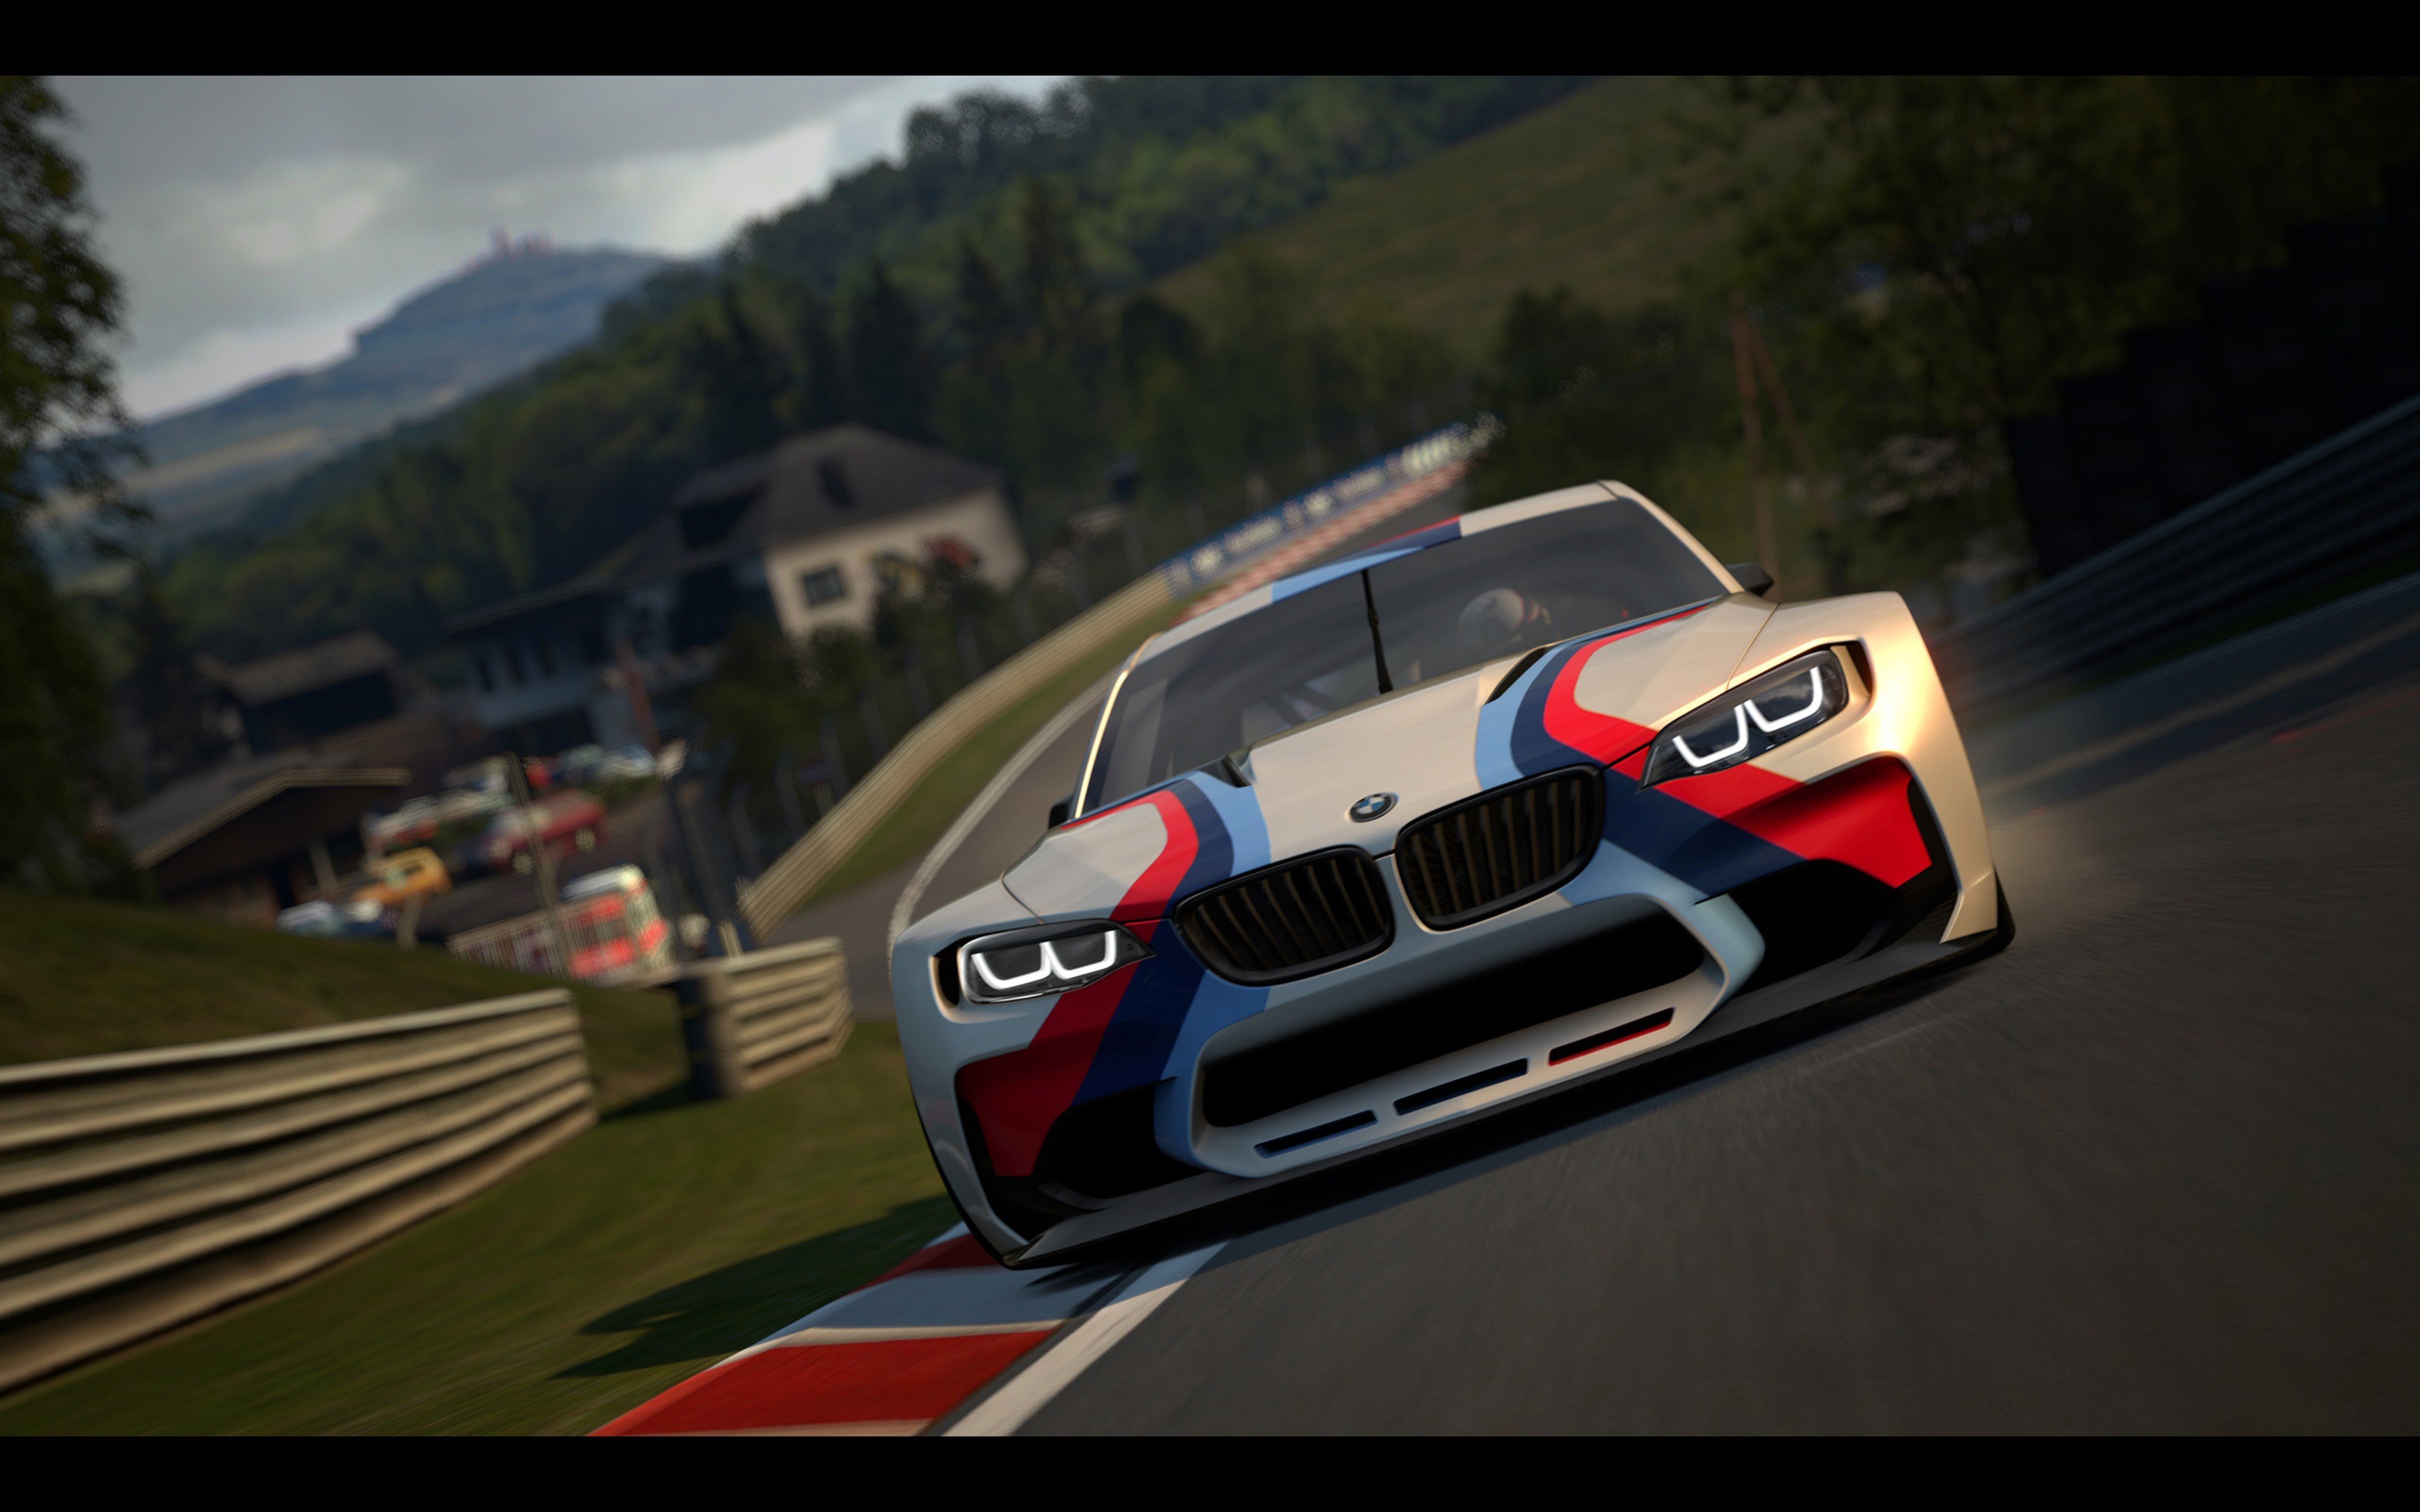 2014, Bmw, Vision, Gran turismo, Concept, Race, Car, Game, Vehicle, Racing, Germany, 4000x2500,  4 Wallpaper